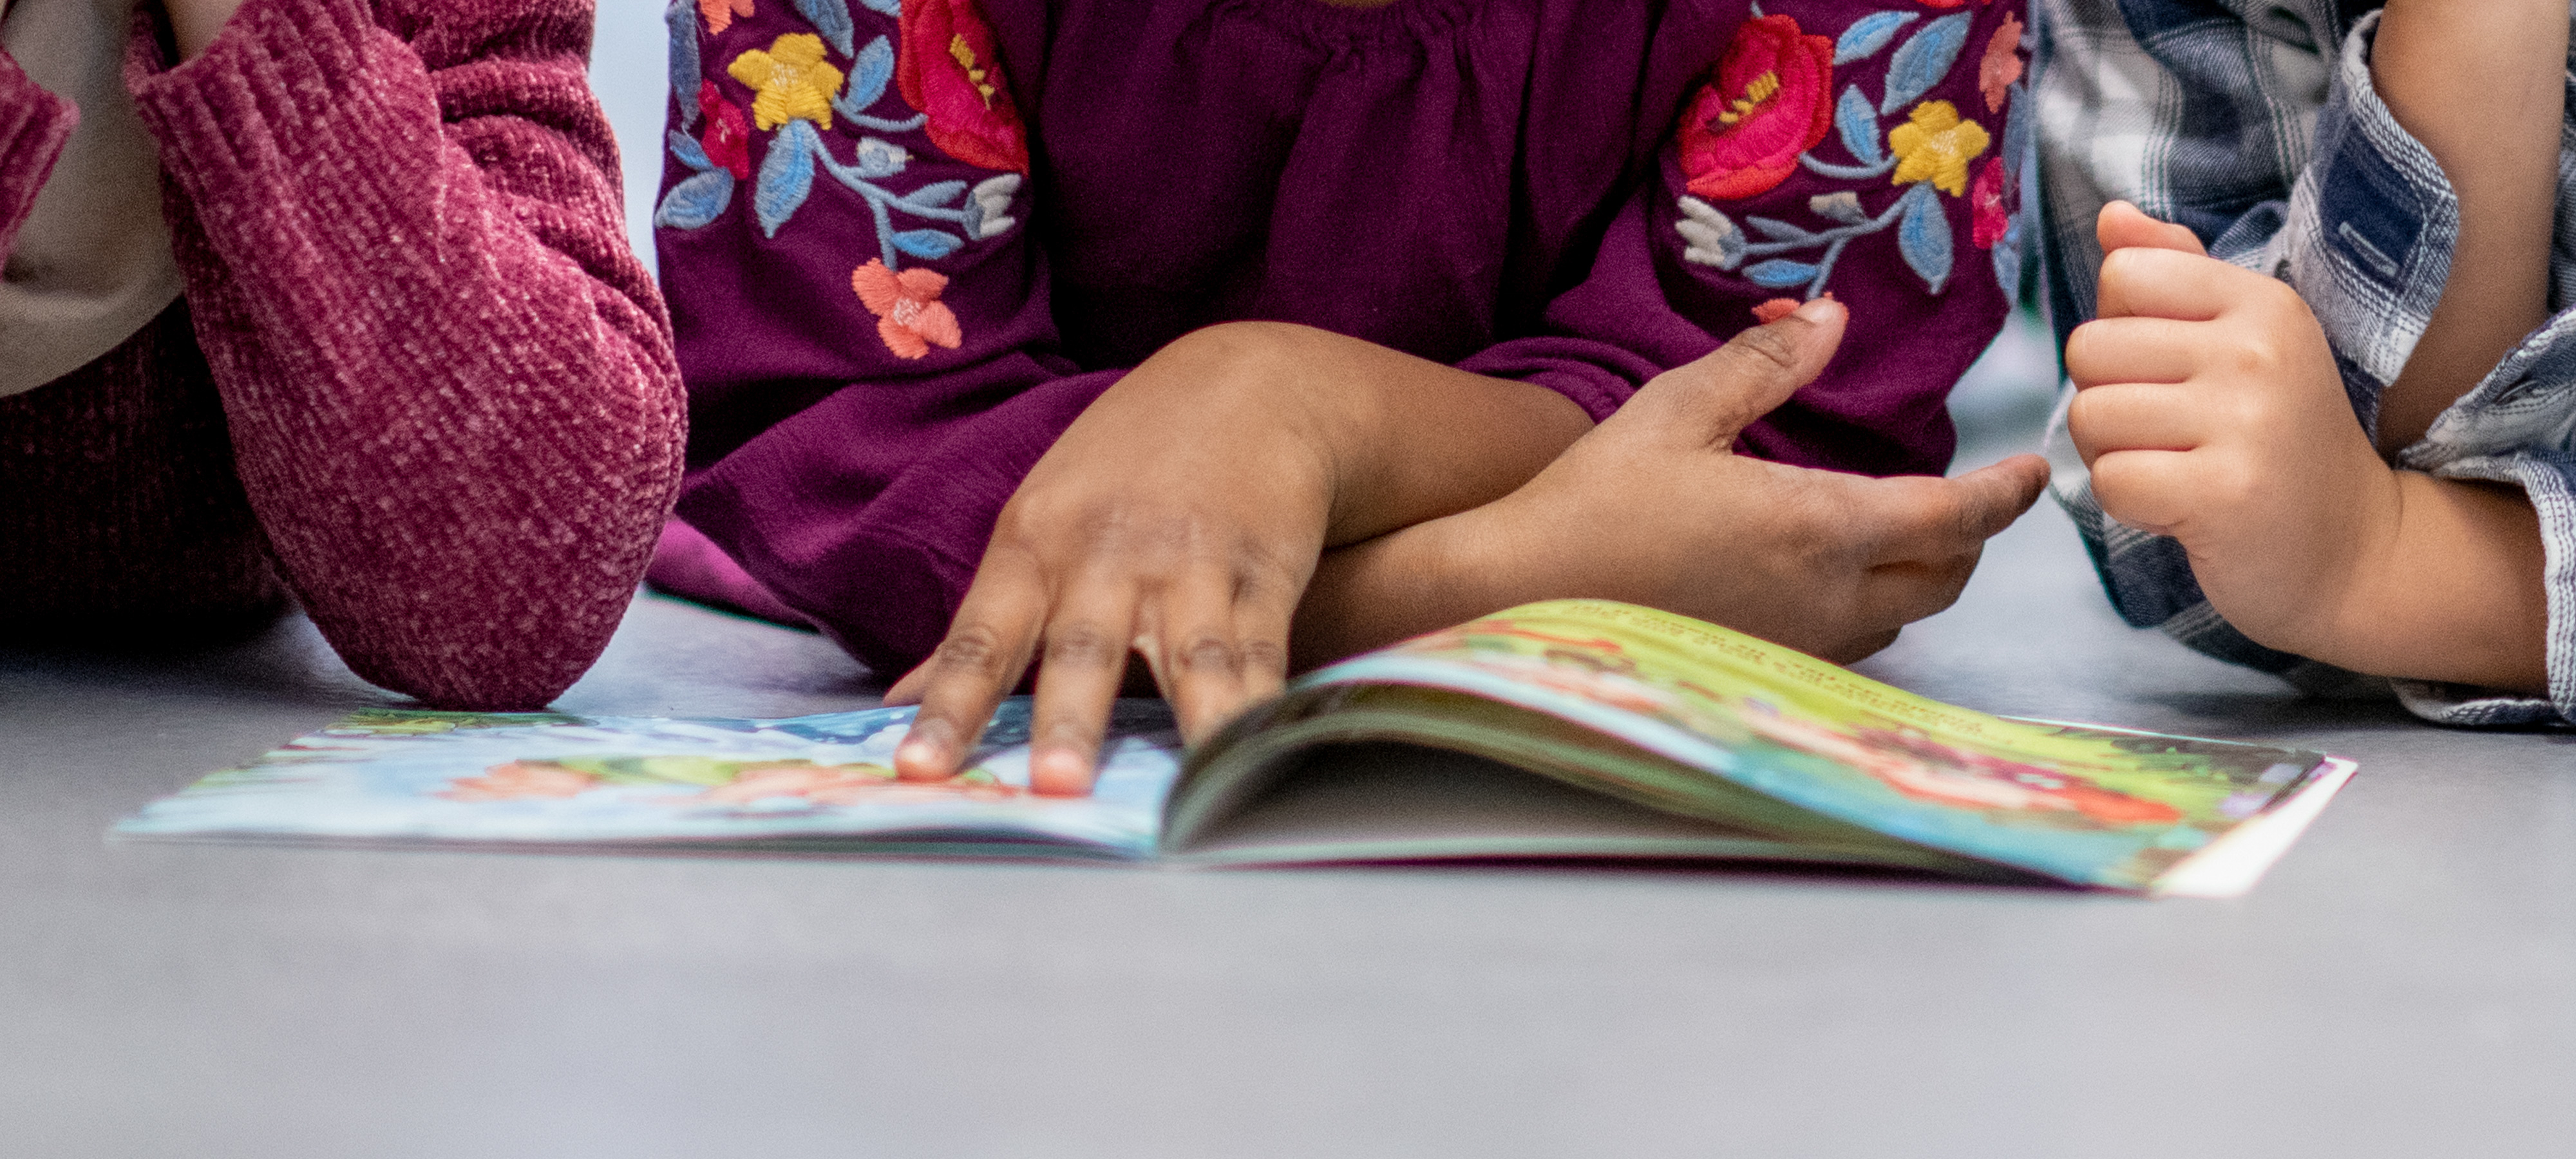 Close-up of the hands and arms of two young elementary school students who are lying together on the floor and reading a book that is on the floor in front of them.